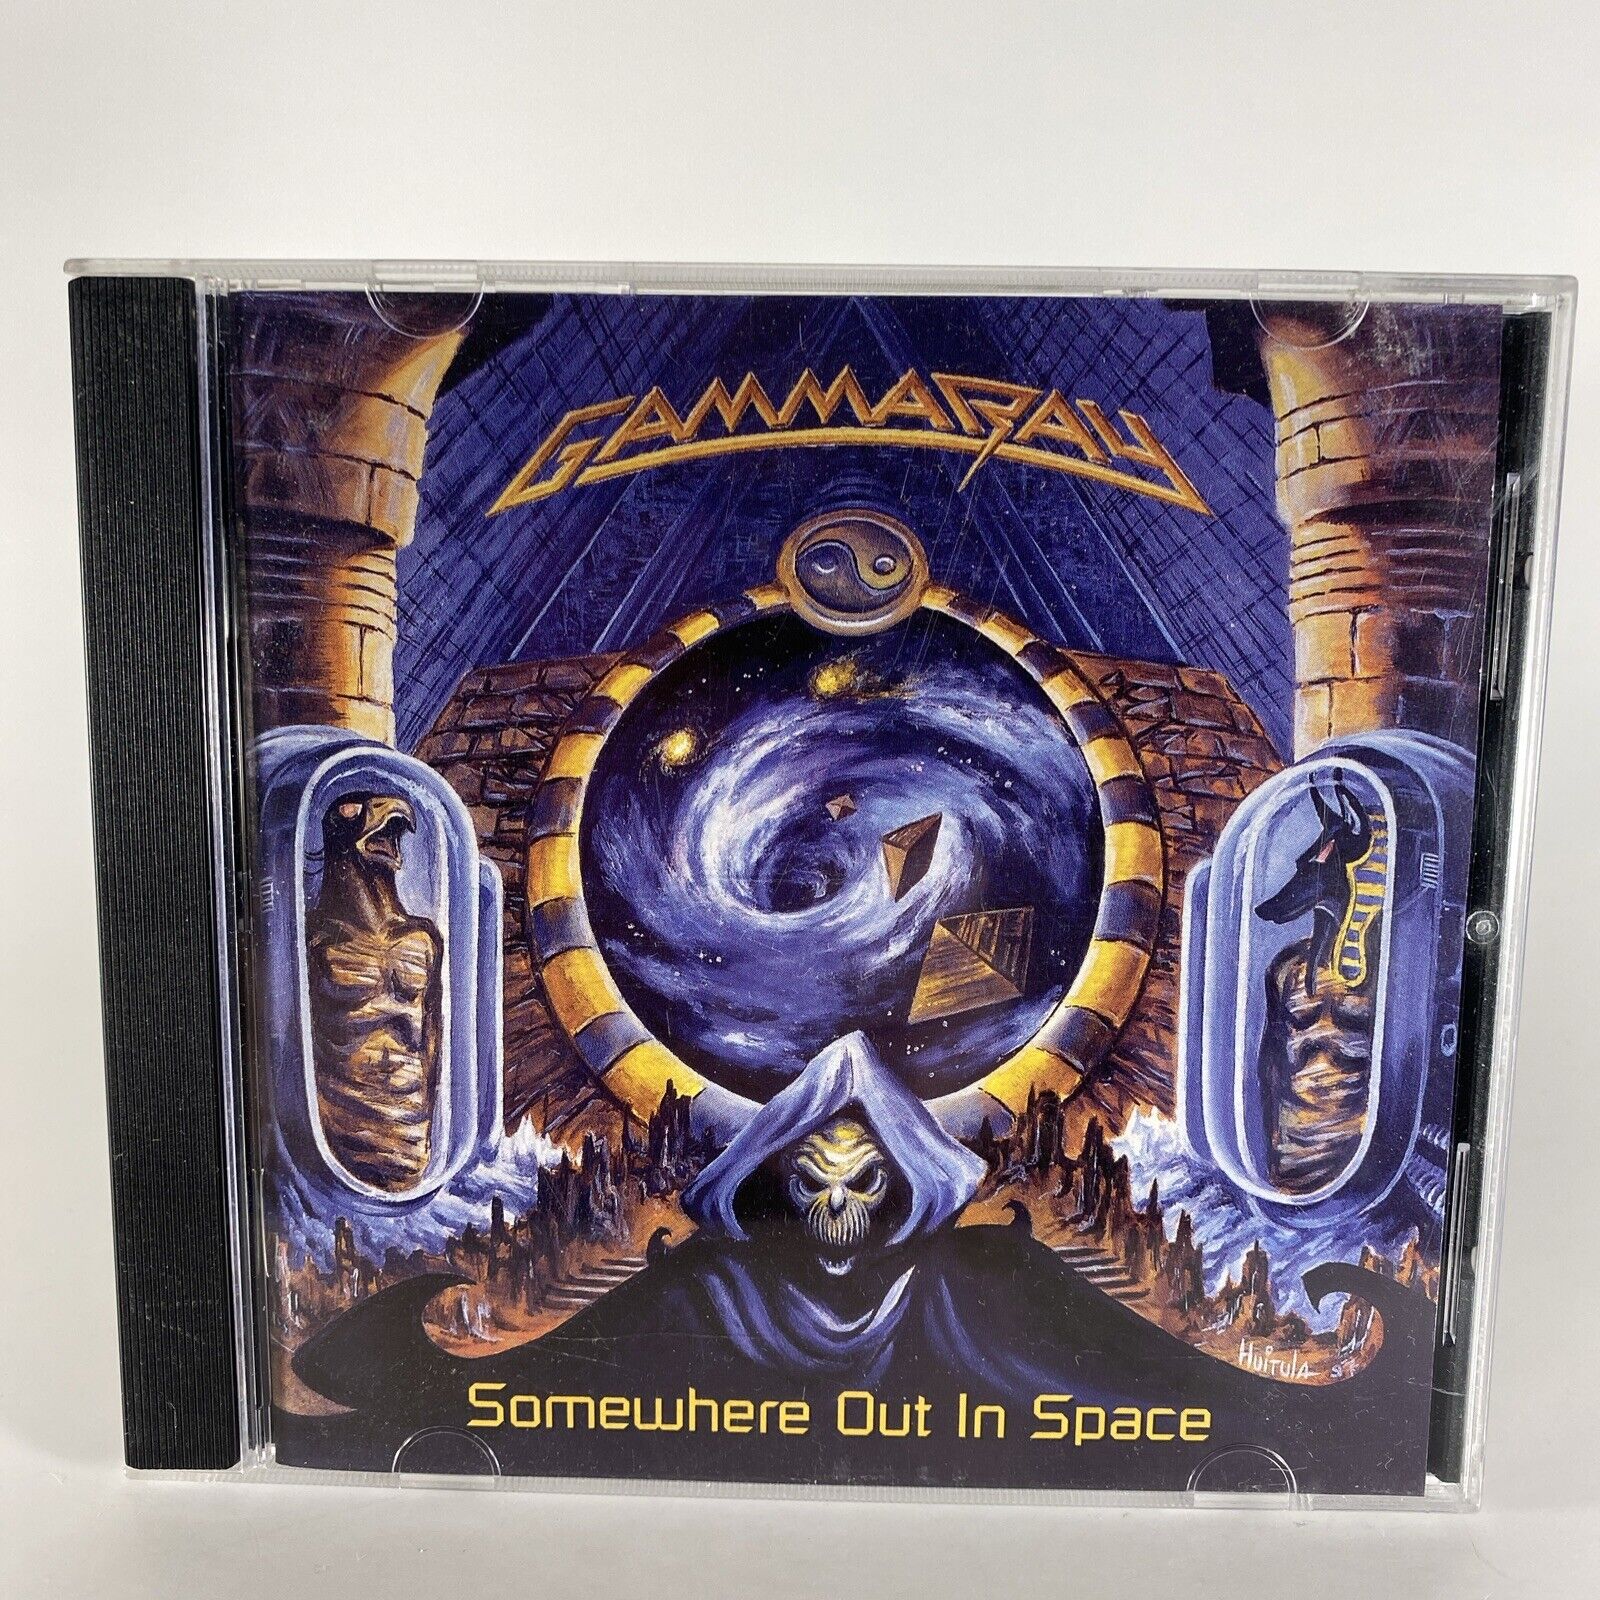 Gamma Ray - Somewhere Out in Space - CD - Good